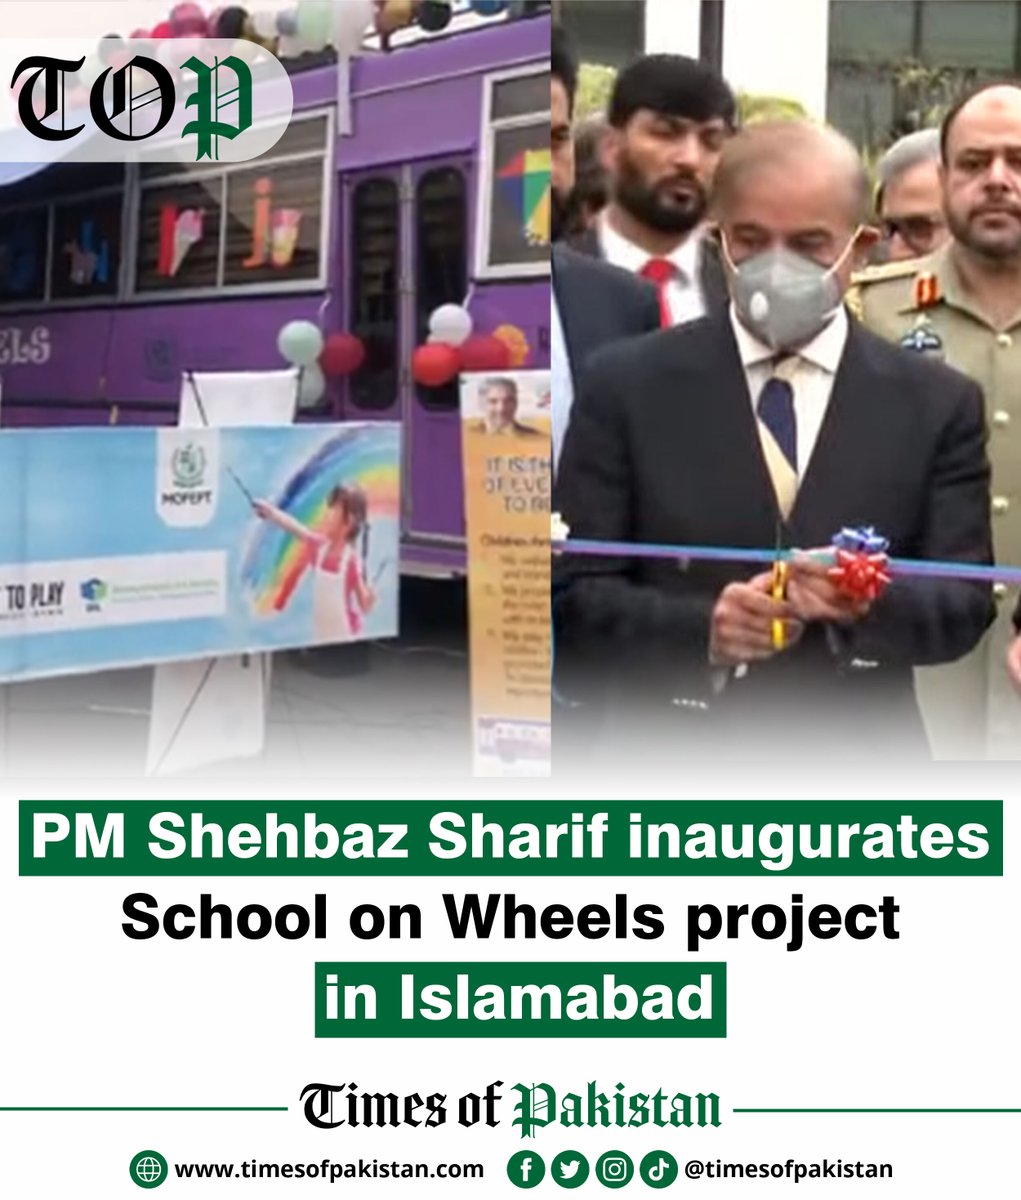 PM Shehbaz Sharif inaugurates School on Wheels project in Islamabad. These 8 mobile schools will provide education to the children in the areas of Islamabad where literacy rate is low.

#SehbazSharif #SchoolonWheels #Islamabad #Education #EducationNews #IslamabadSchools